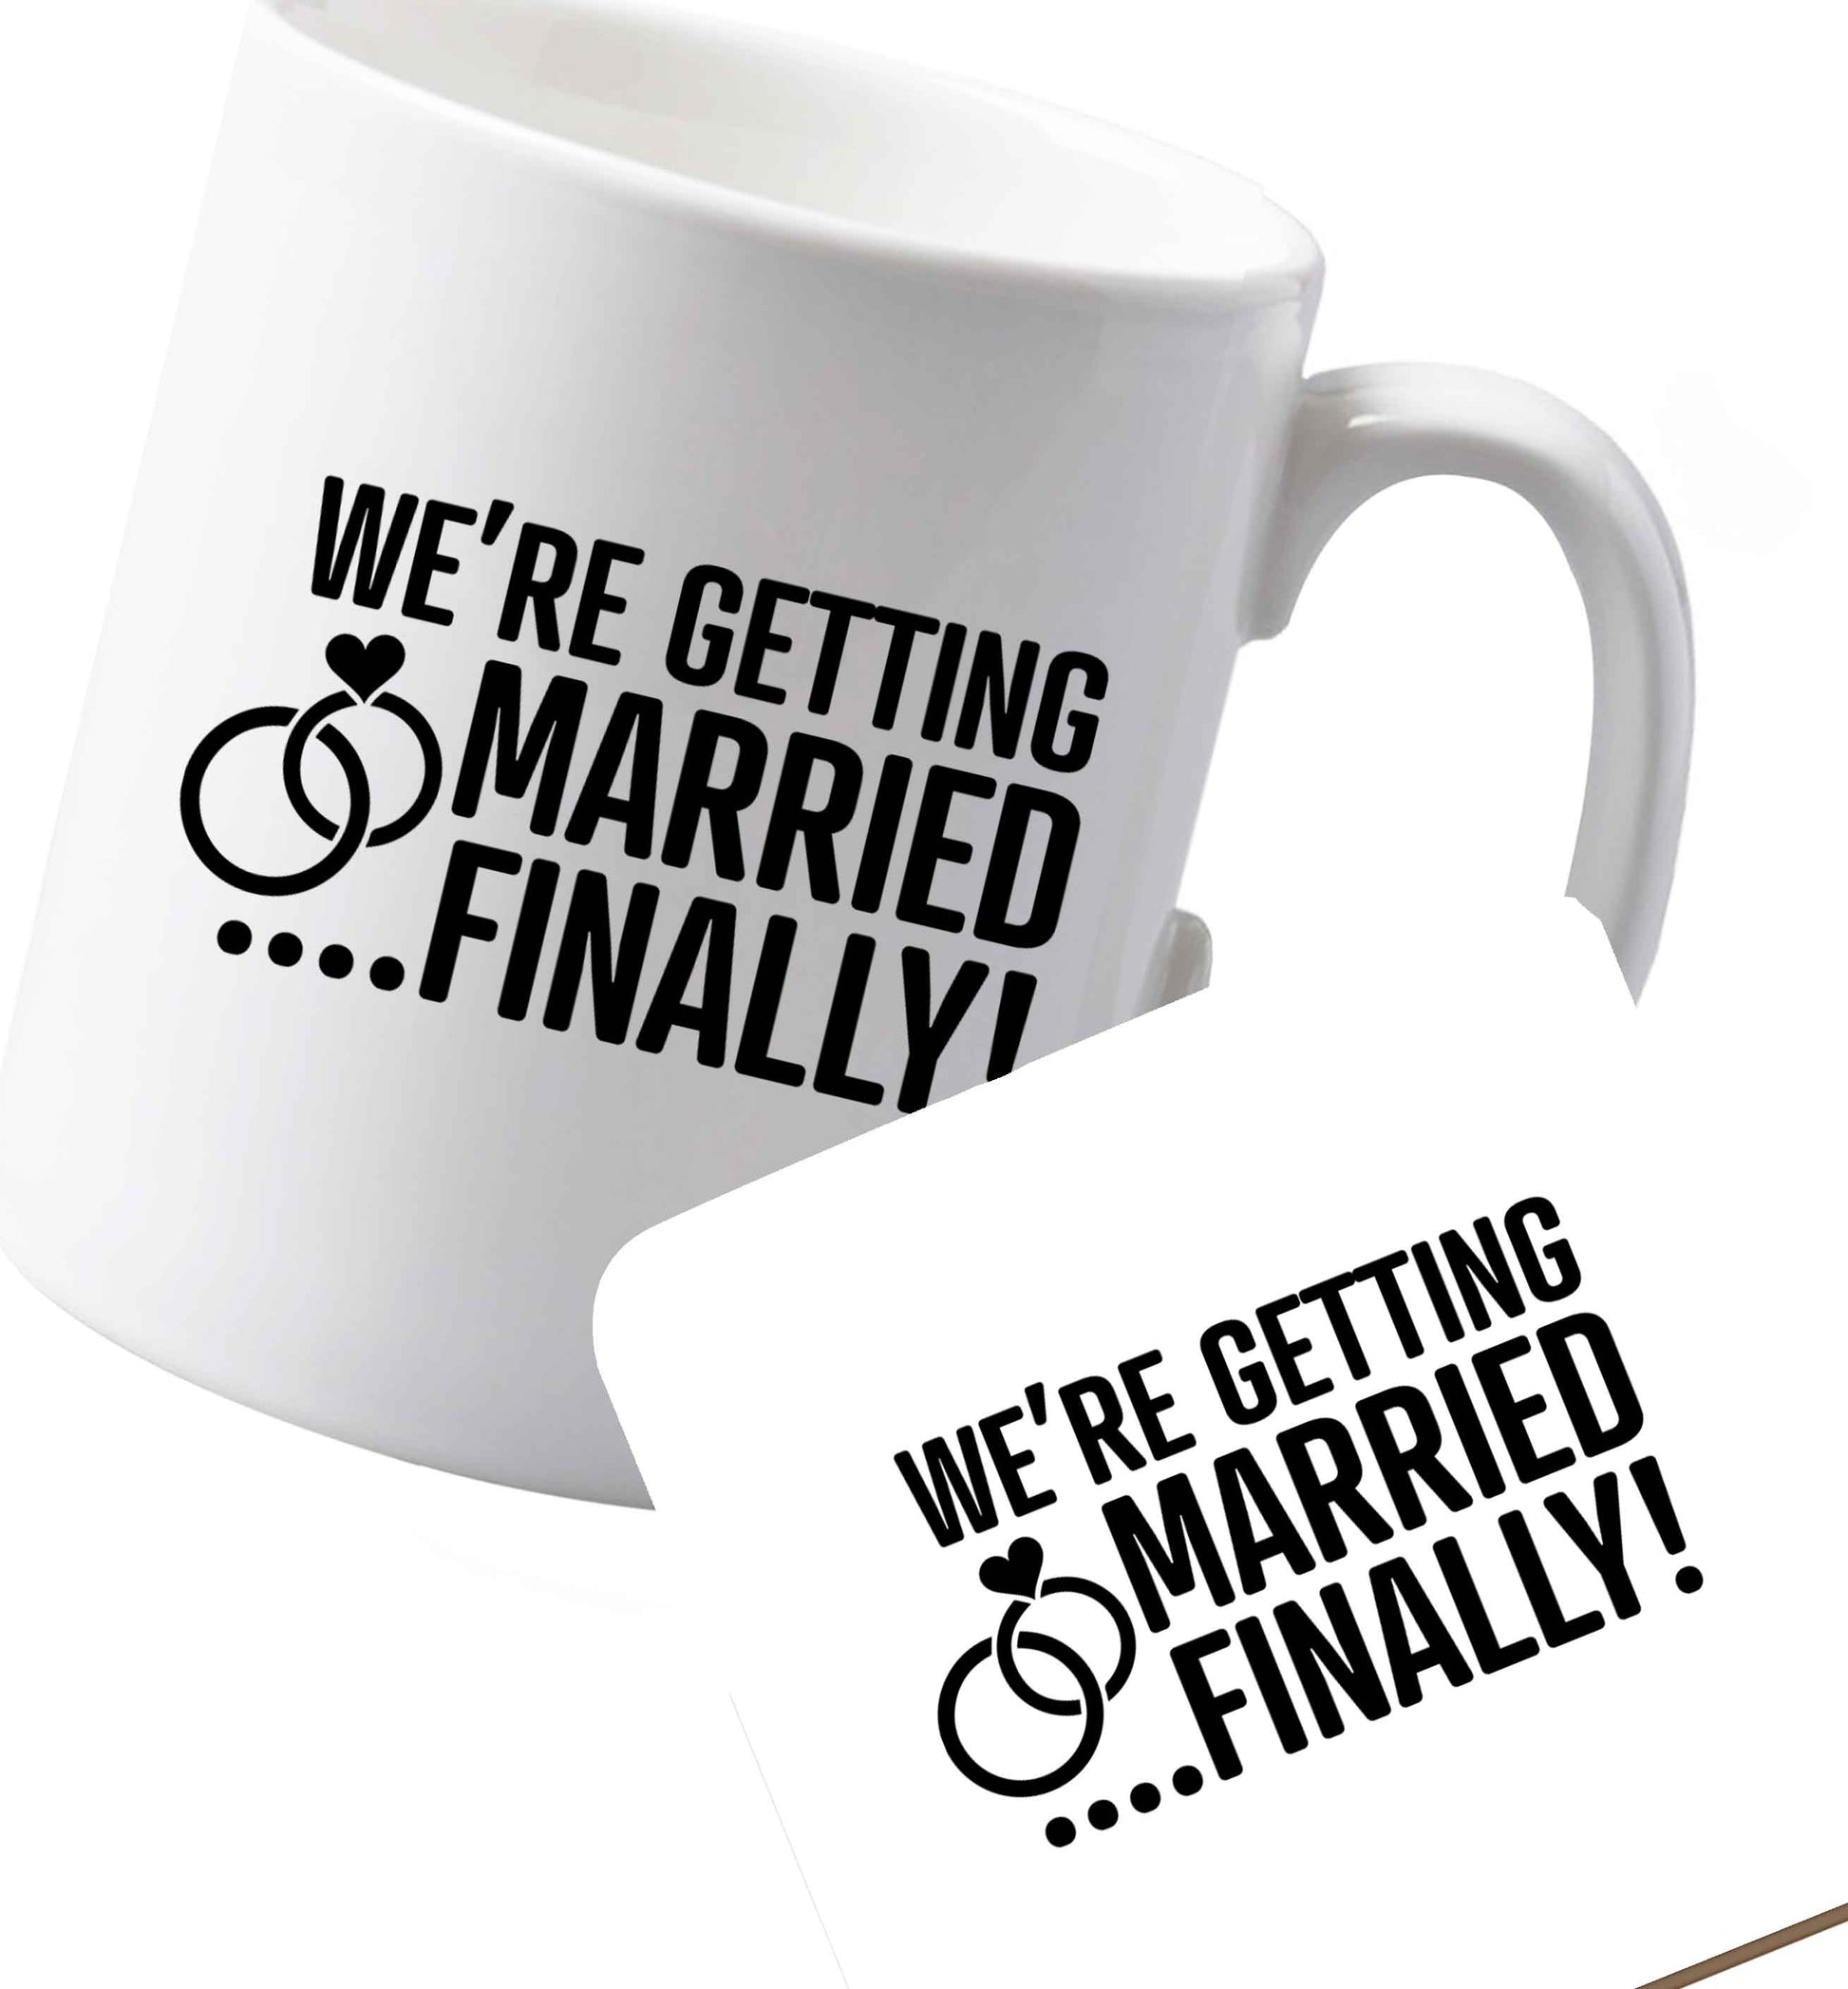 10 oz Ceramic mug and coaster It's been a long wait but it's finally happening! Let everyone know you're celebrating your big day soon!   both sides